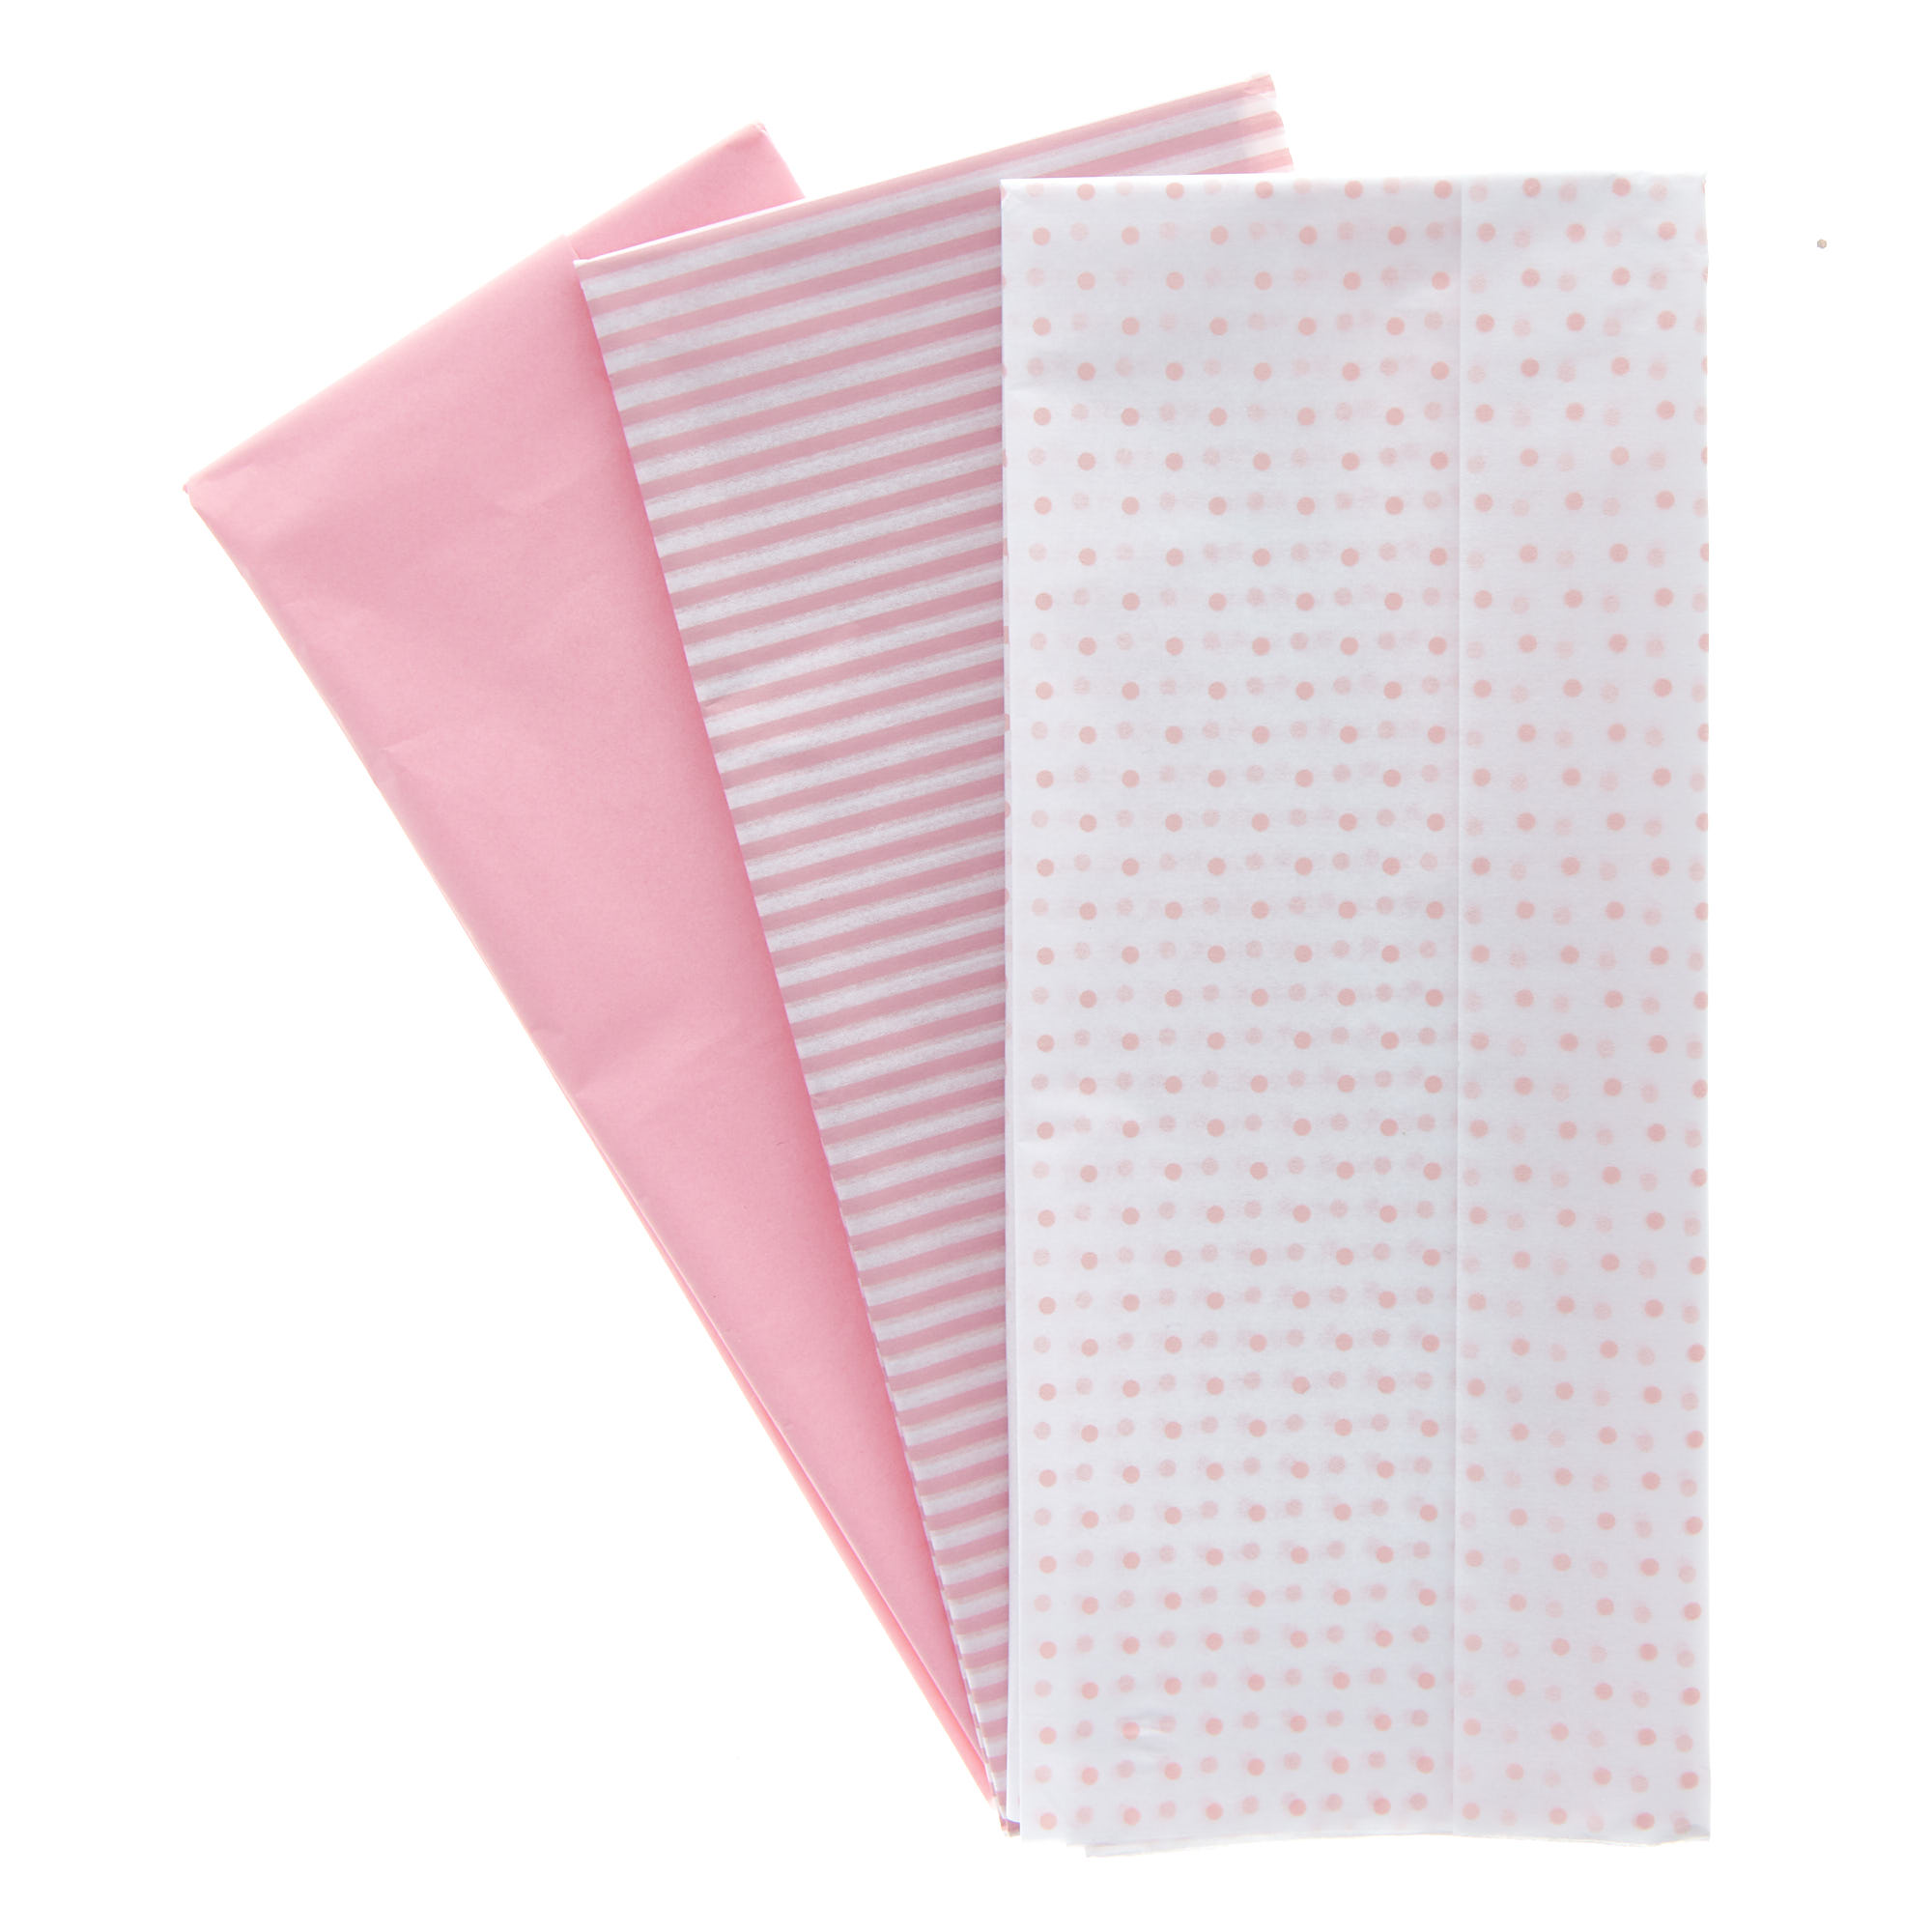 Buy Baby Pink Patterned Tissue Paper - 6 Sheets for GBP 1.99 | Card ...